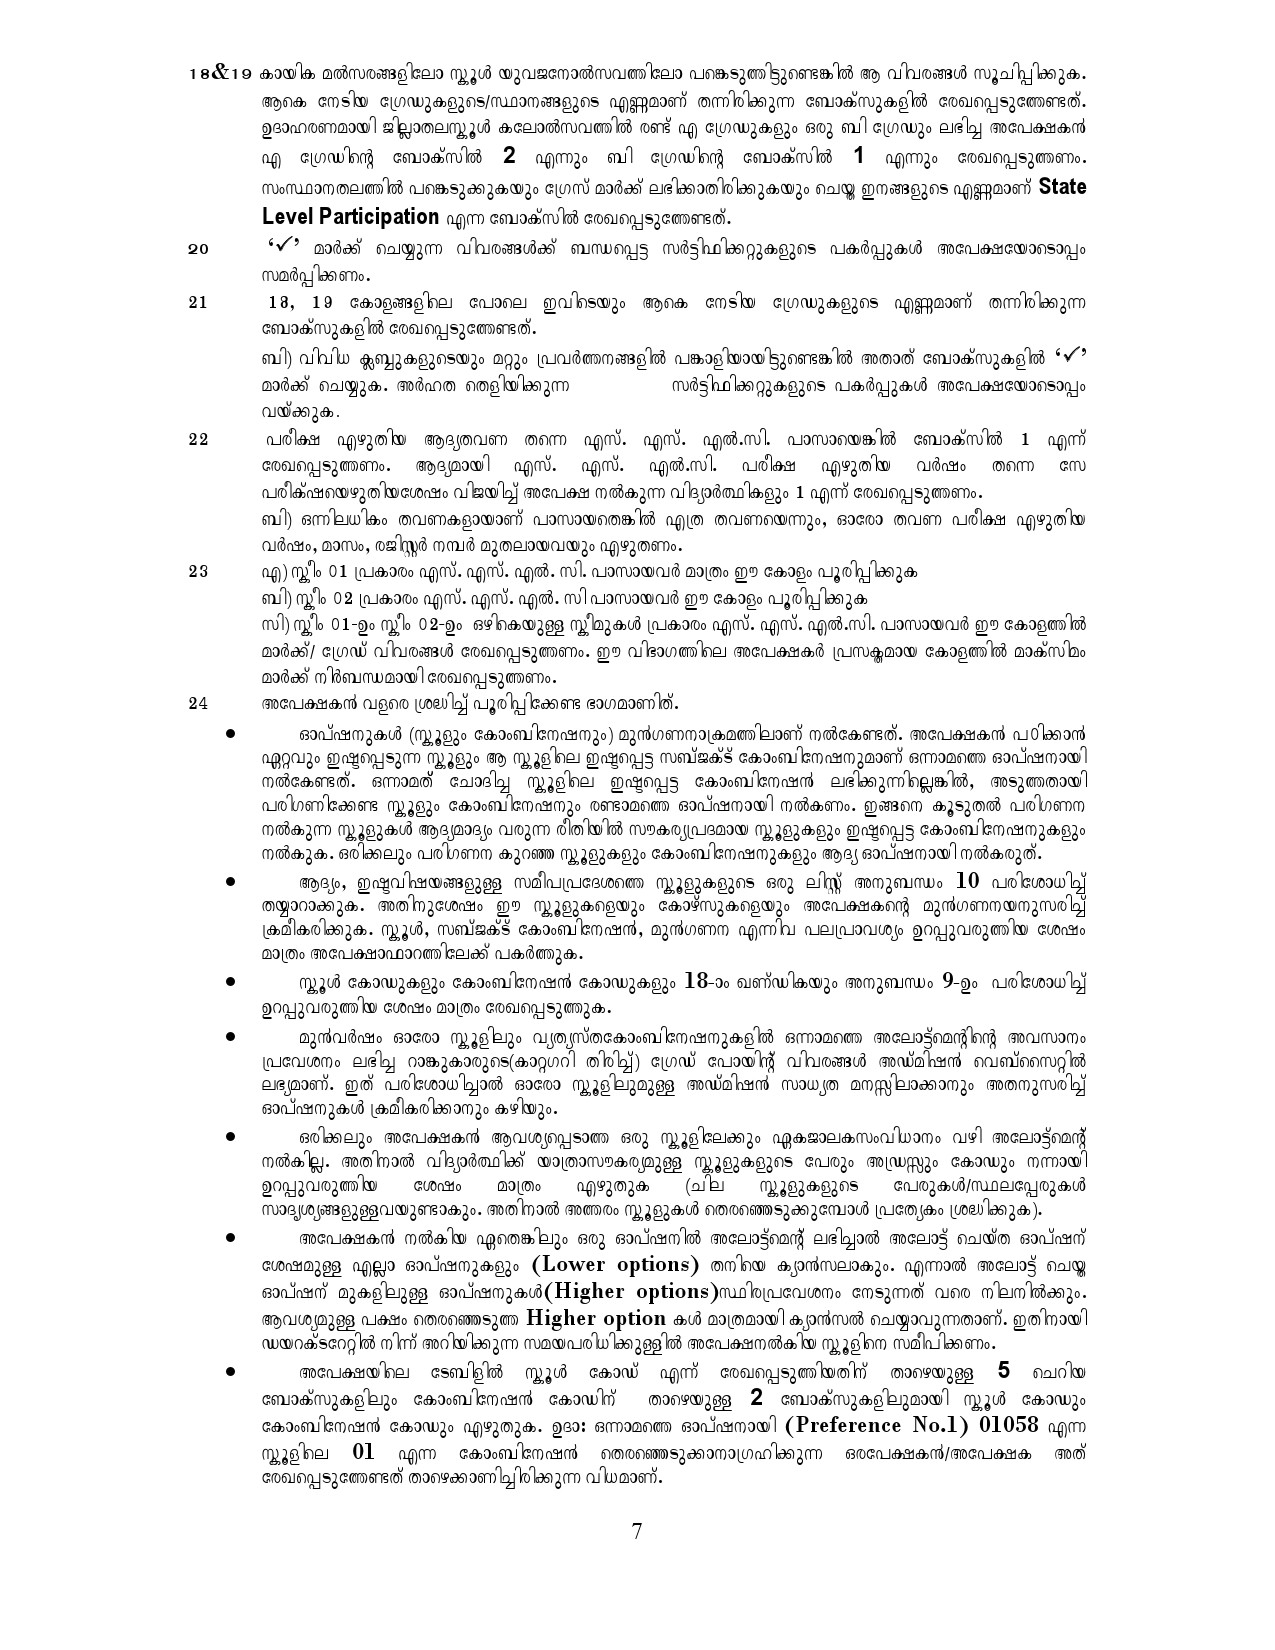 Higher Secondary School Online Application Manual in Malayalam - Notification Image 7